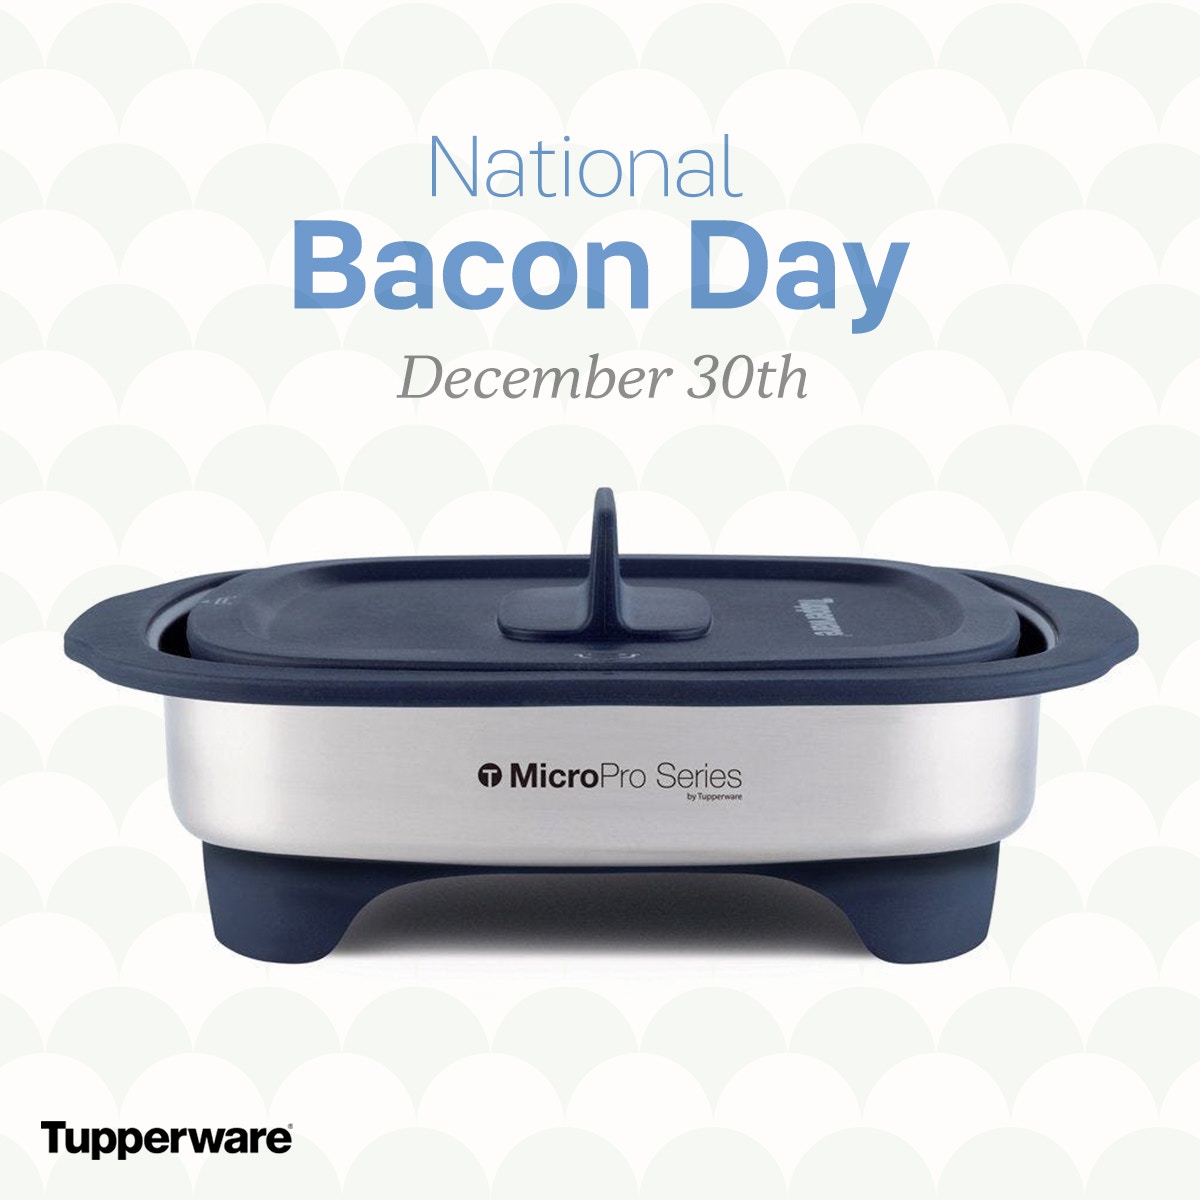 licens biografi pyramide Tupperware Independent Rep. on Twitter: "Bacon makes everything better, and  the Tupperware MicroPro Grill makes bacon better! https://t.co/bD7IkkhmgB"  / Twitter